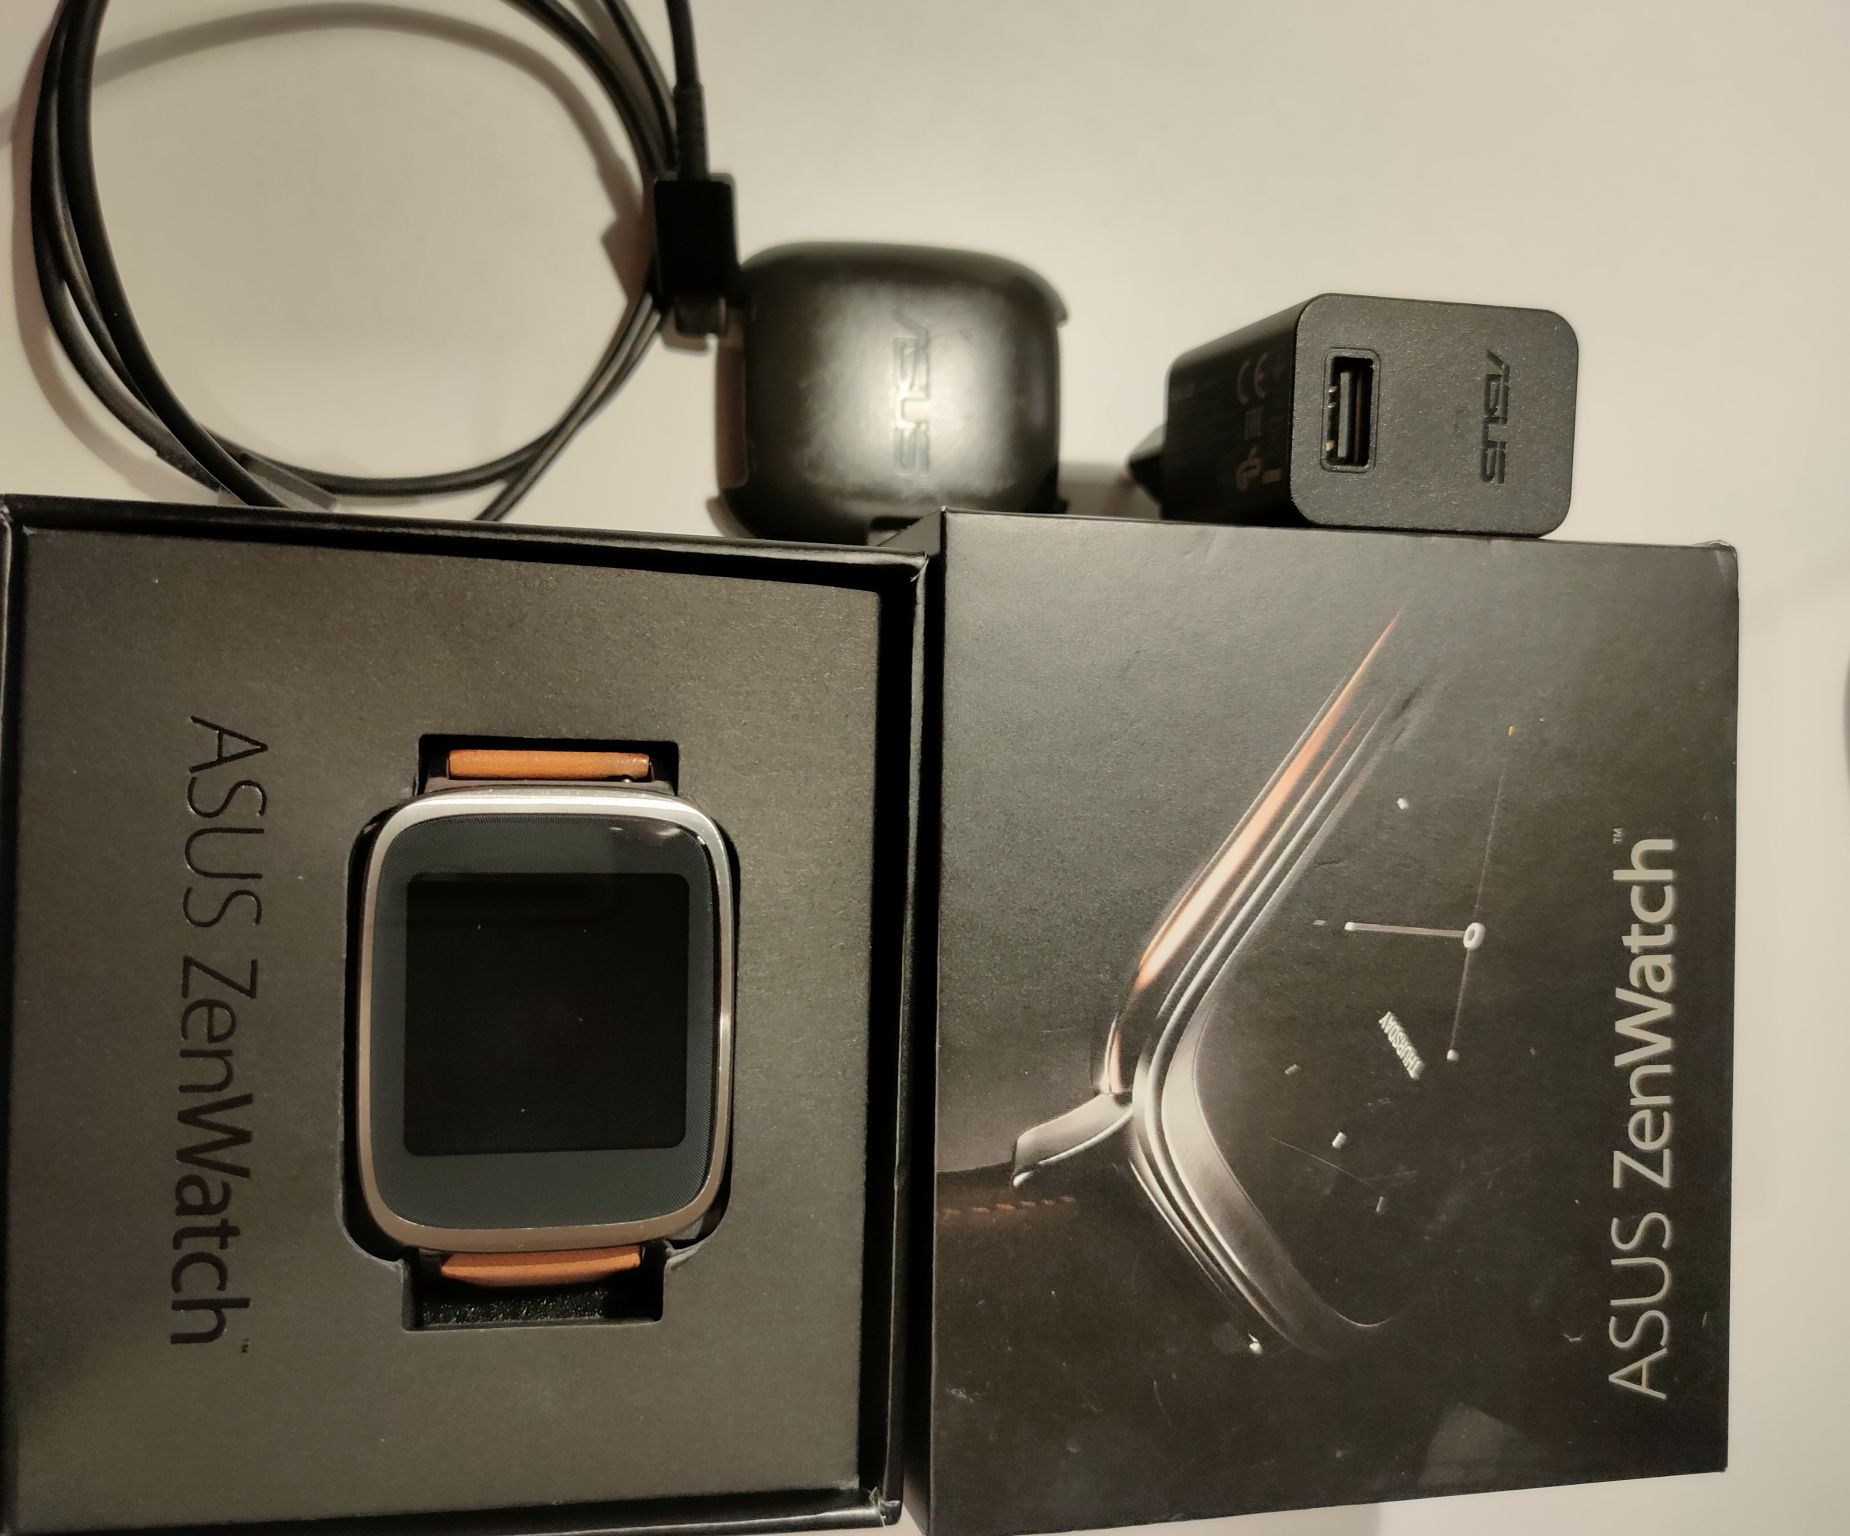 ASUS ZenWatch WI500Q Android